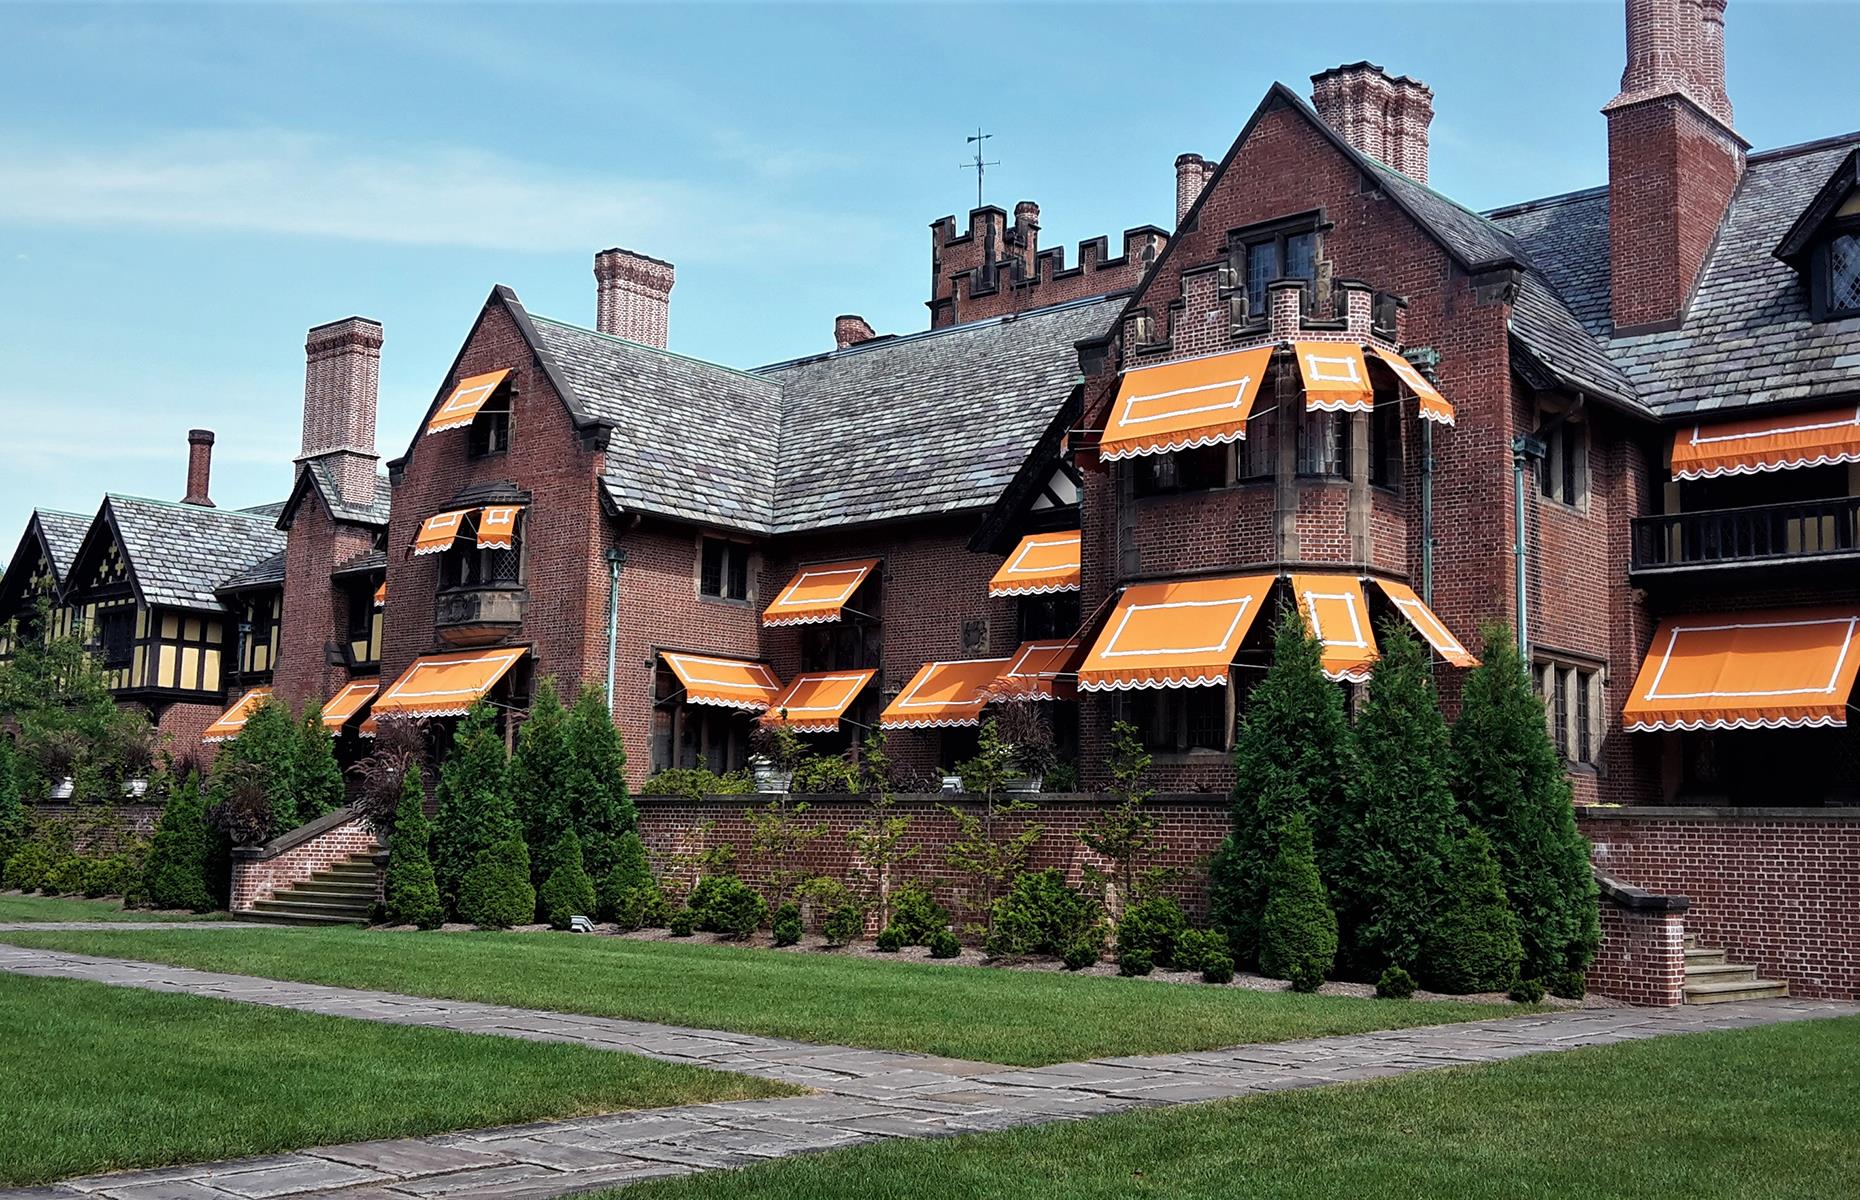 <p>A rare example of a Tudor Revival building in the US, this eye-catching estate was built in the early 20th century by Goodyear Tire and Rubber company co-founder F. A. Seiberling. The estate comprises a 65-room manor house and gardens as well as an impressive art collection. Visitors can take a guided tour that snakes through the house and areas of the garden, as well as the Gate Lodge – the birthplace of Alcoholics Anonymous. Note that it is temporarily closed until 1 April.</p>